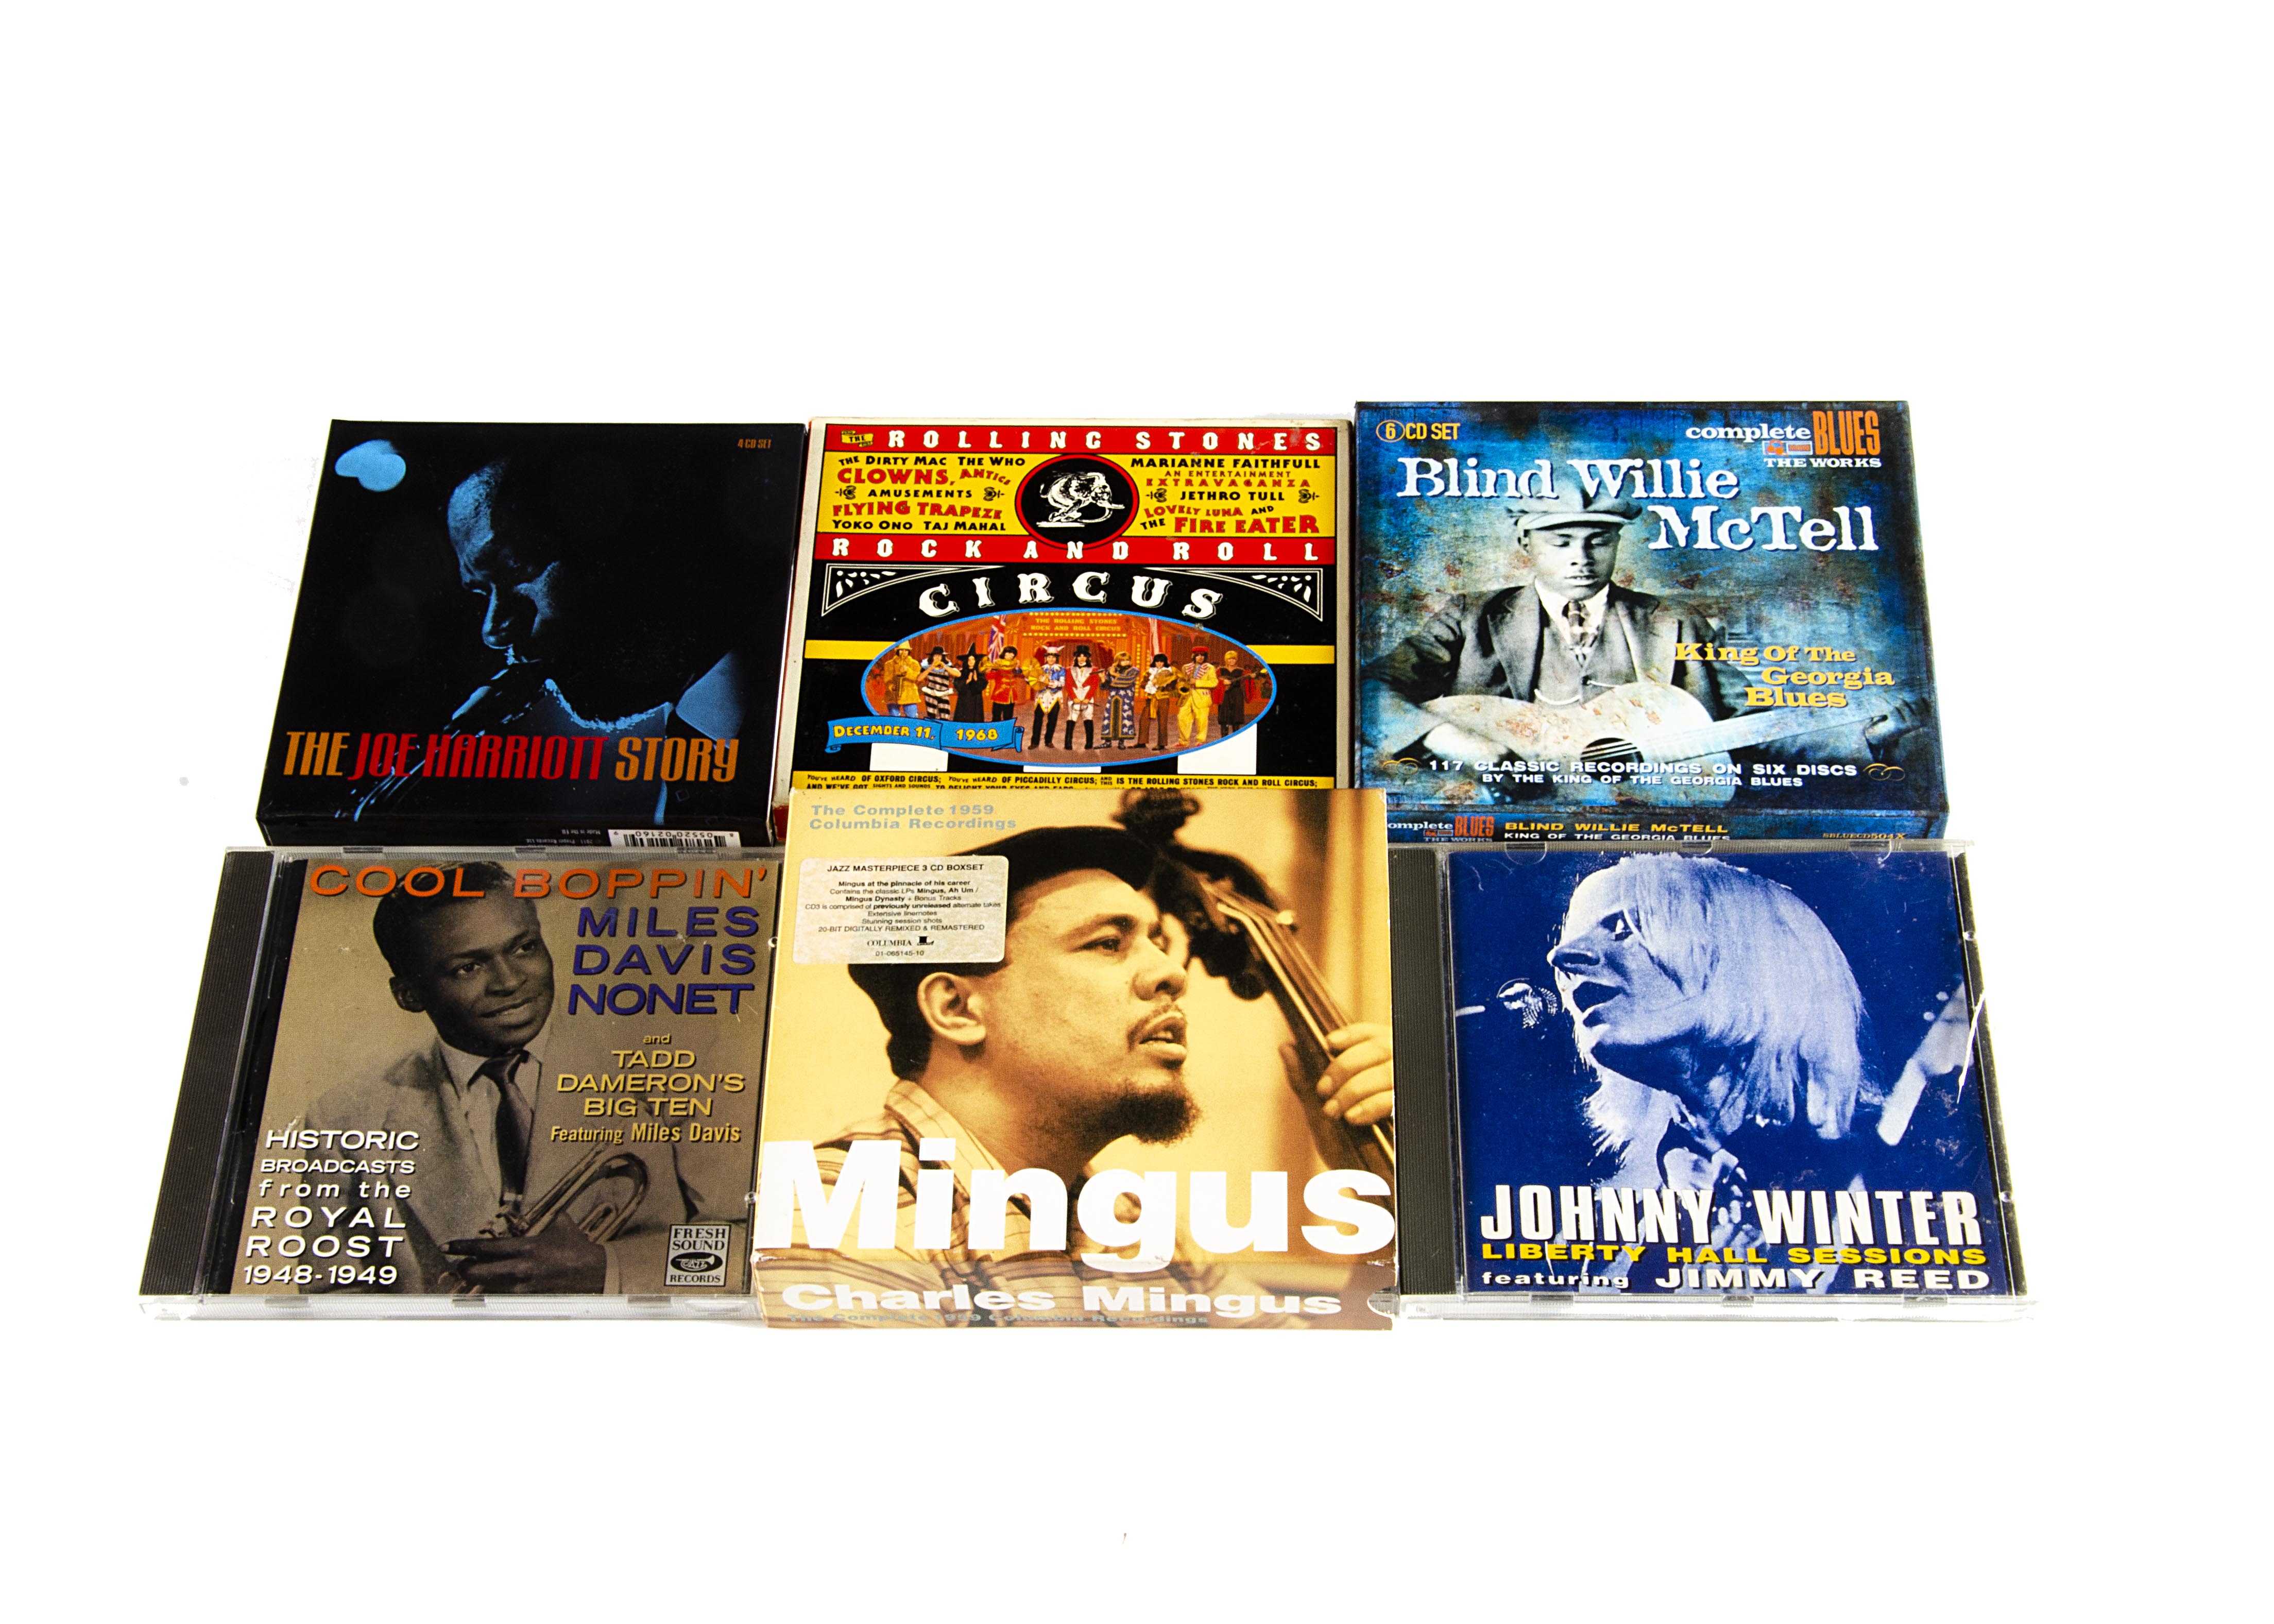 Blues / Jazz / Rock n Roll CDs / Box Sets, approximately one hundred and forty CDs and Box Sets of - Image 2 of 2